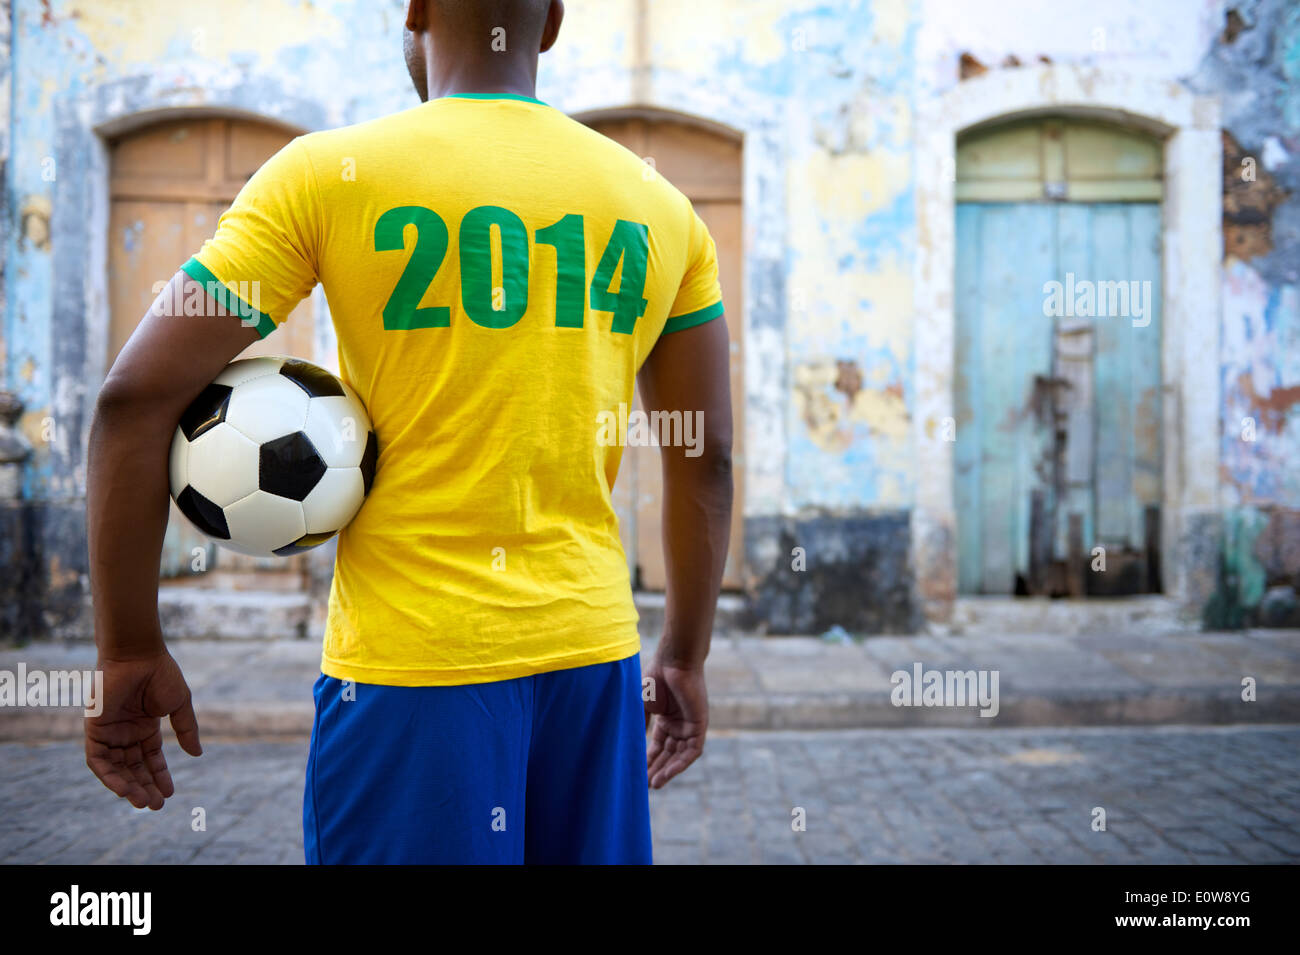 Brazilian football player in 2014 shirt stands holding a soccer ball on an old favela street in rustic village Stock Photo